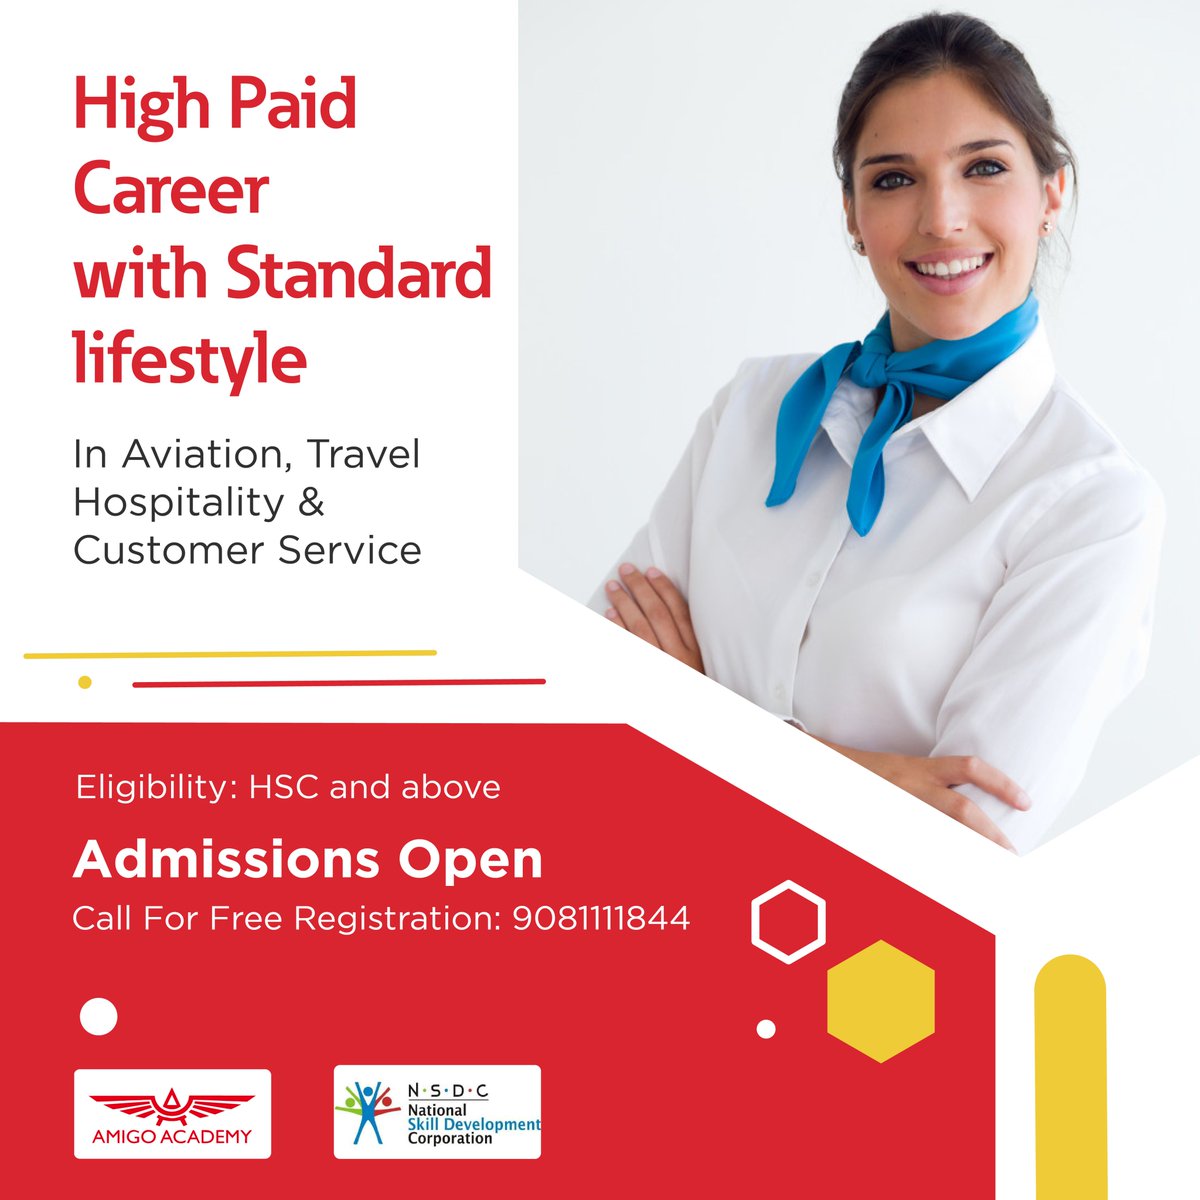 High Paid career with standard life style. 
Career opportunity after 12th & higher in Aviation Industry. 
Become air hostess, Cabin crew, travel or hospitality manager, and more. 
#onlineadmissionopen #ahmedabadschools #schoolsinahmedabad #gujarati #ahmedabadi #admissionopen